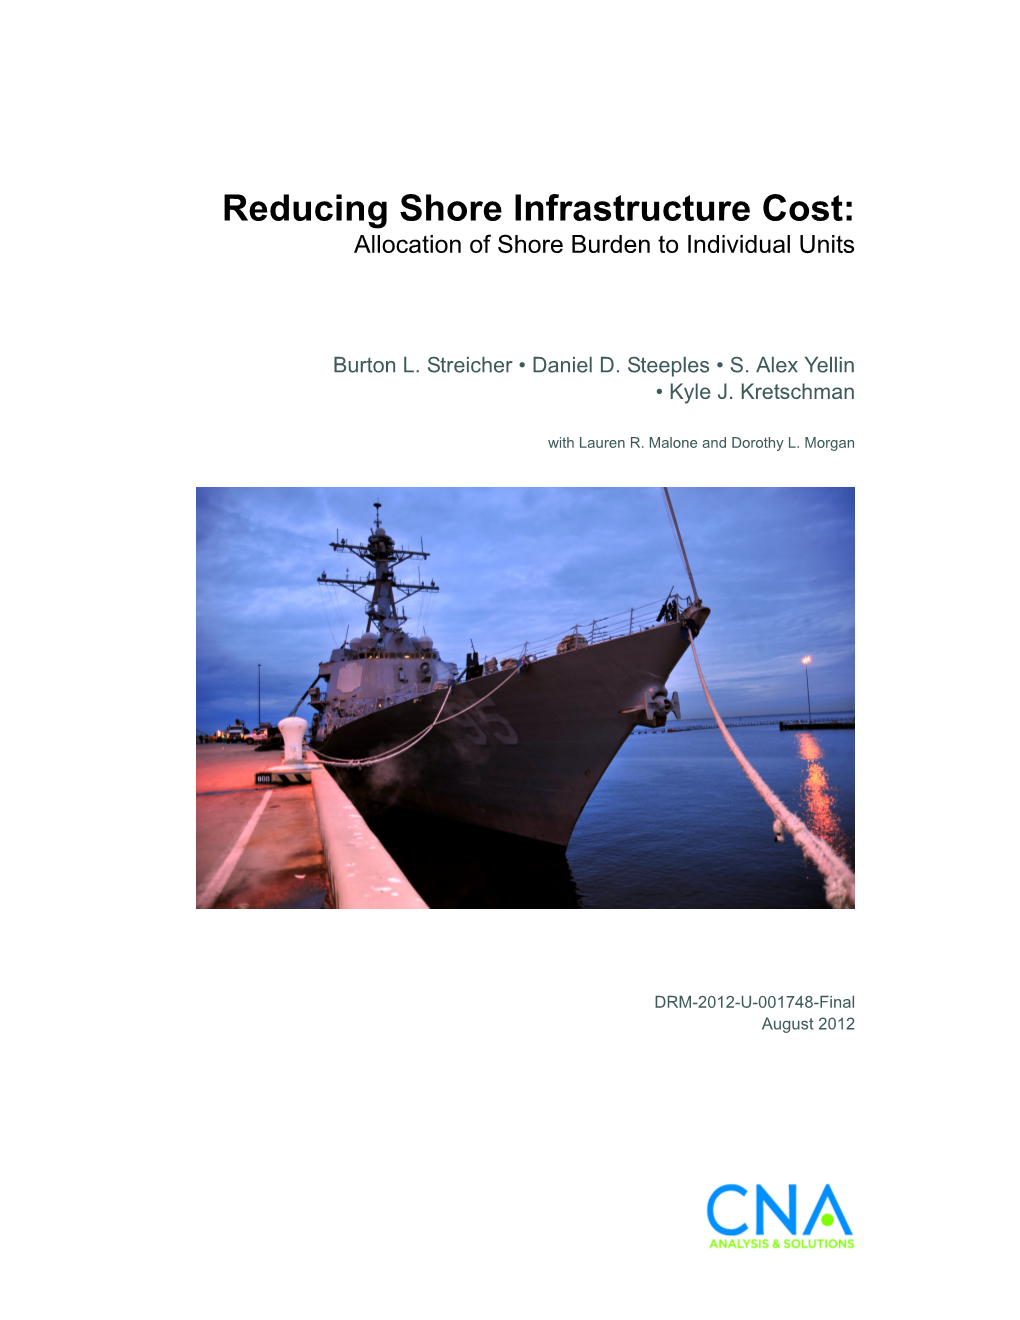 Reducing Shore Infrastructure Cost: Allocation of Shore Burden to Individual Units